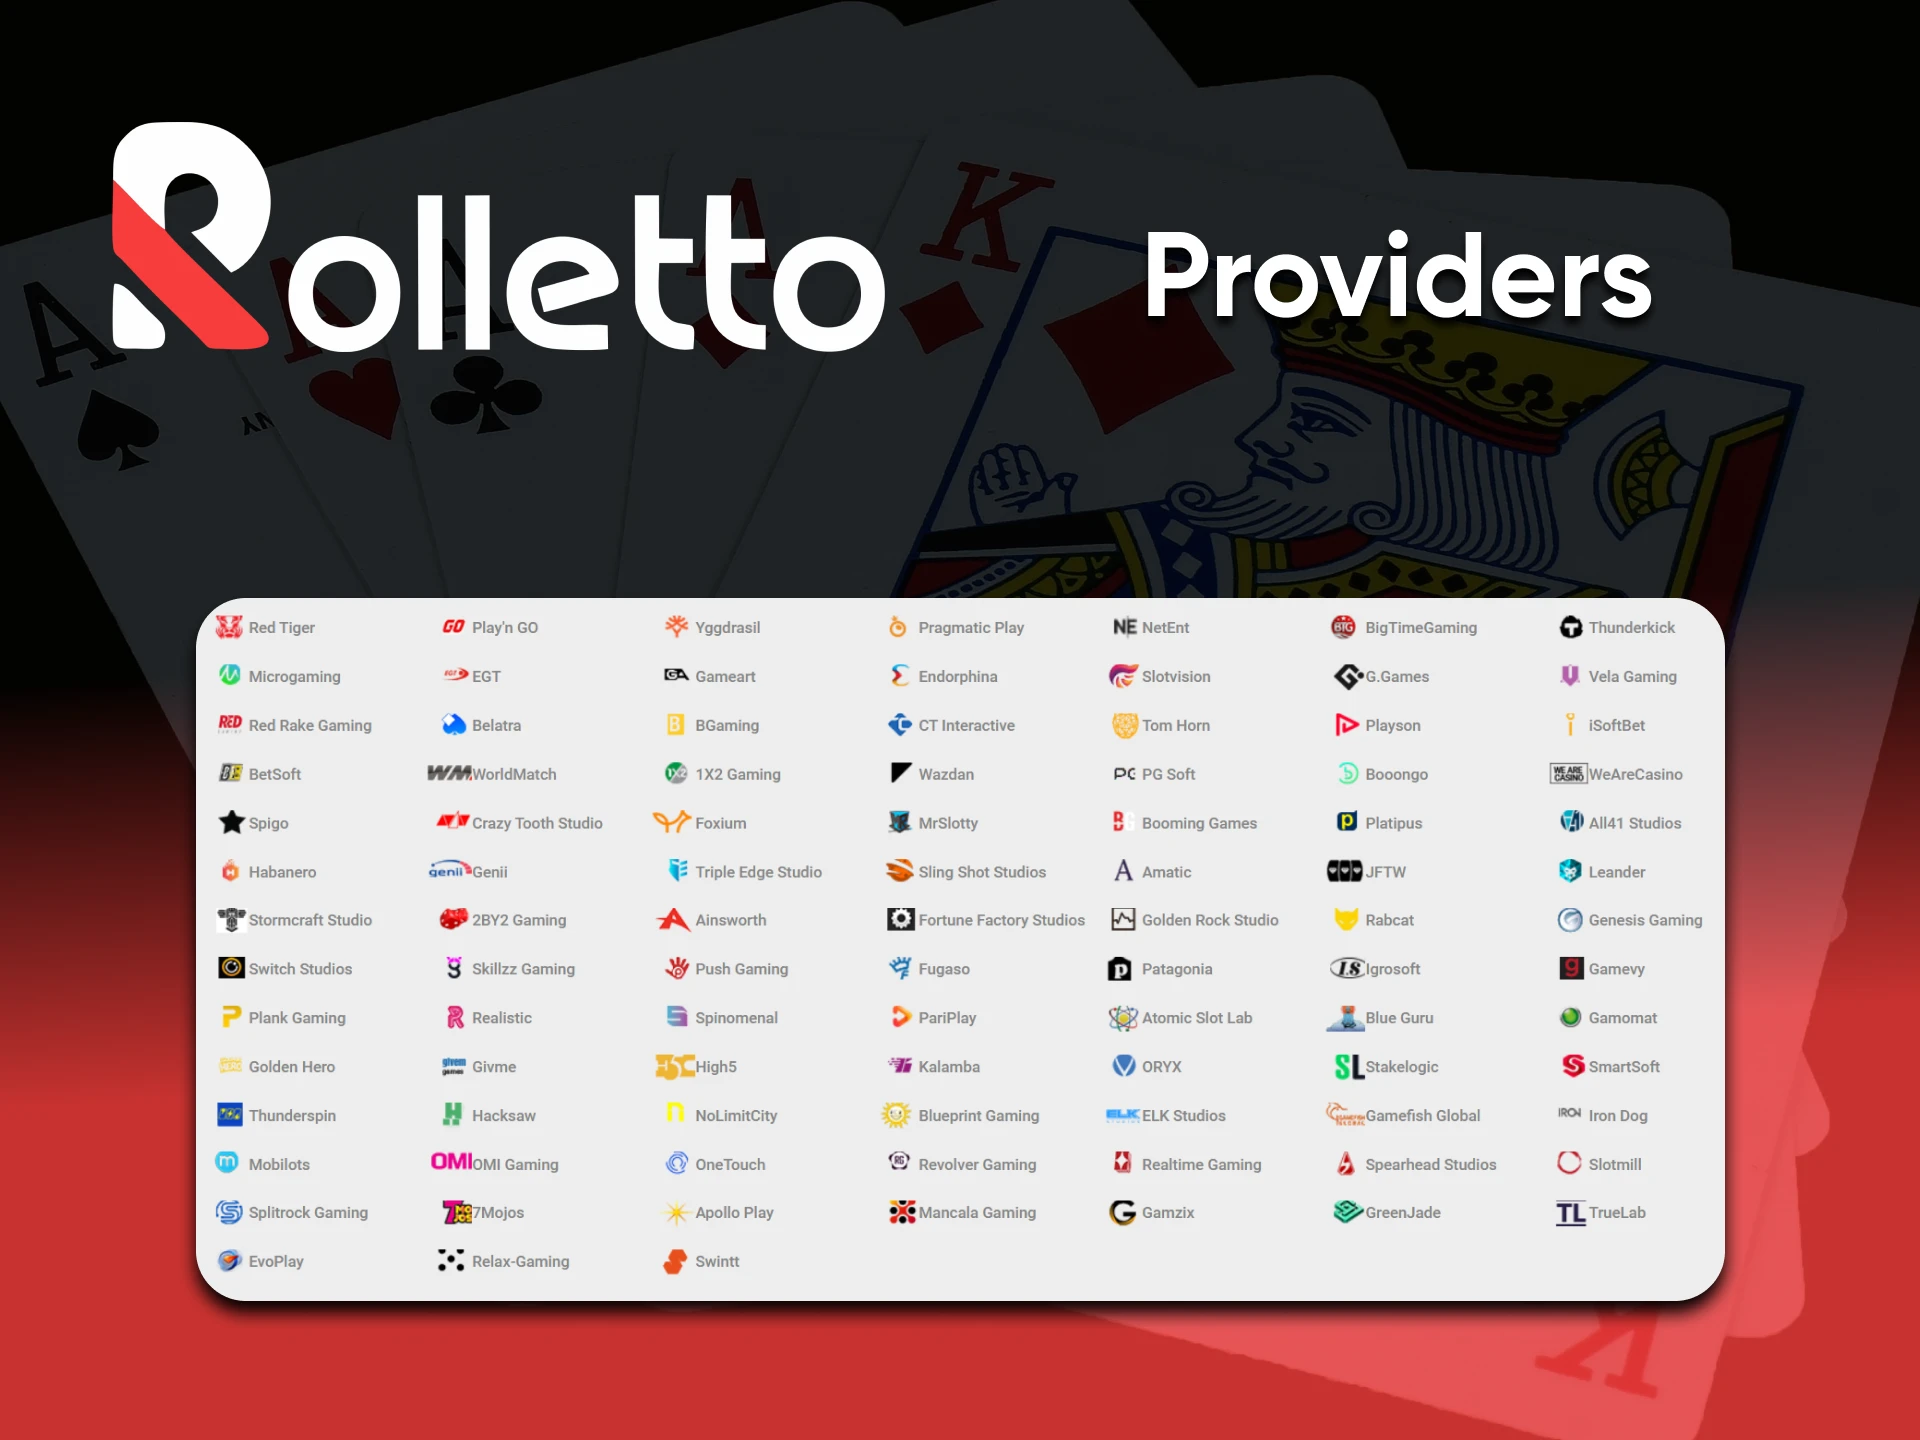 The Rolletto website is the supplier of a large number of casino game providers.